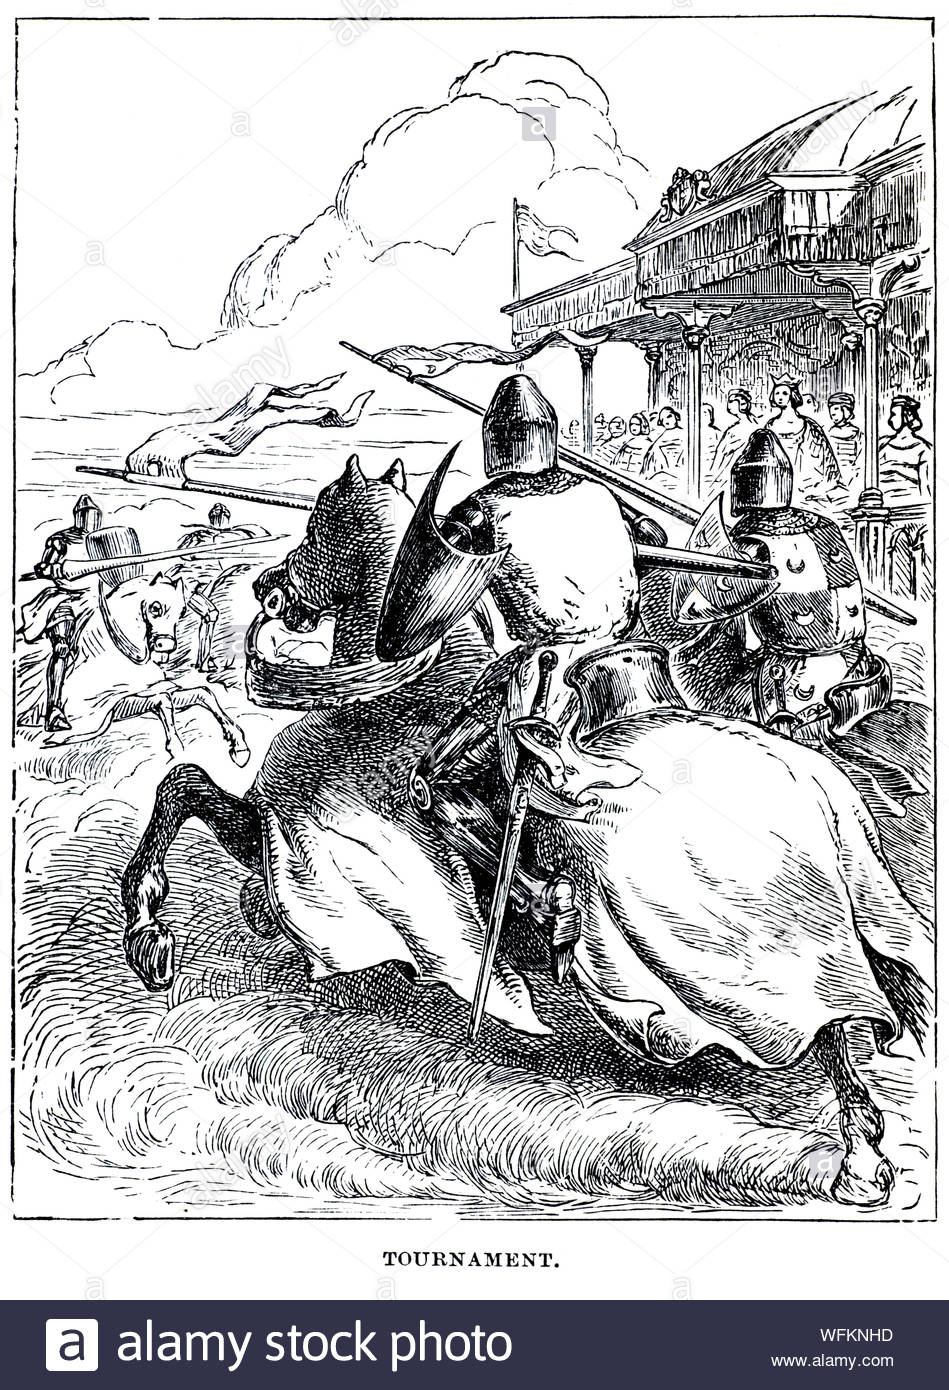 Tournament, Medieval Knights on horseback in battle, vintage illustration from 1900 Stock Photo